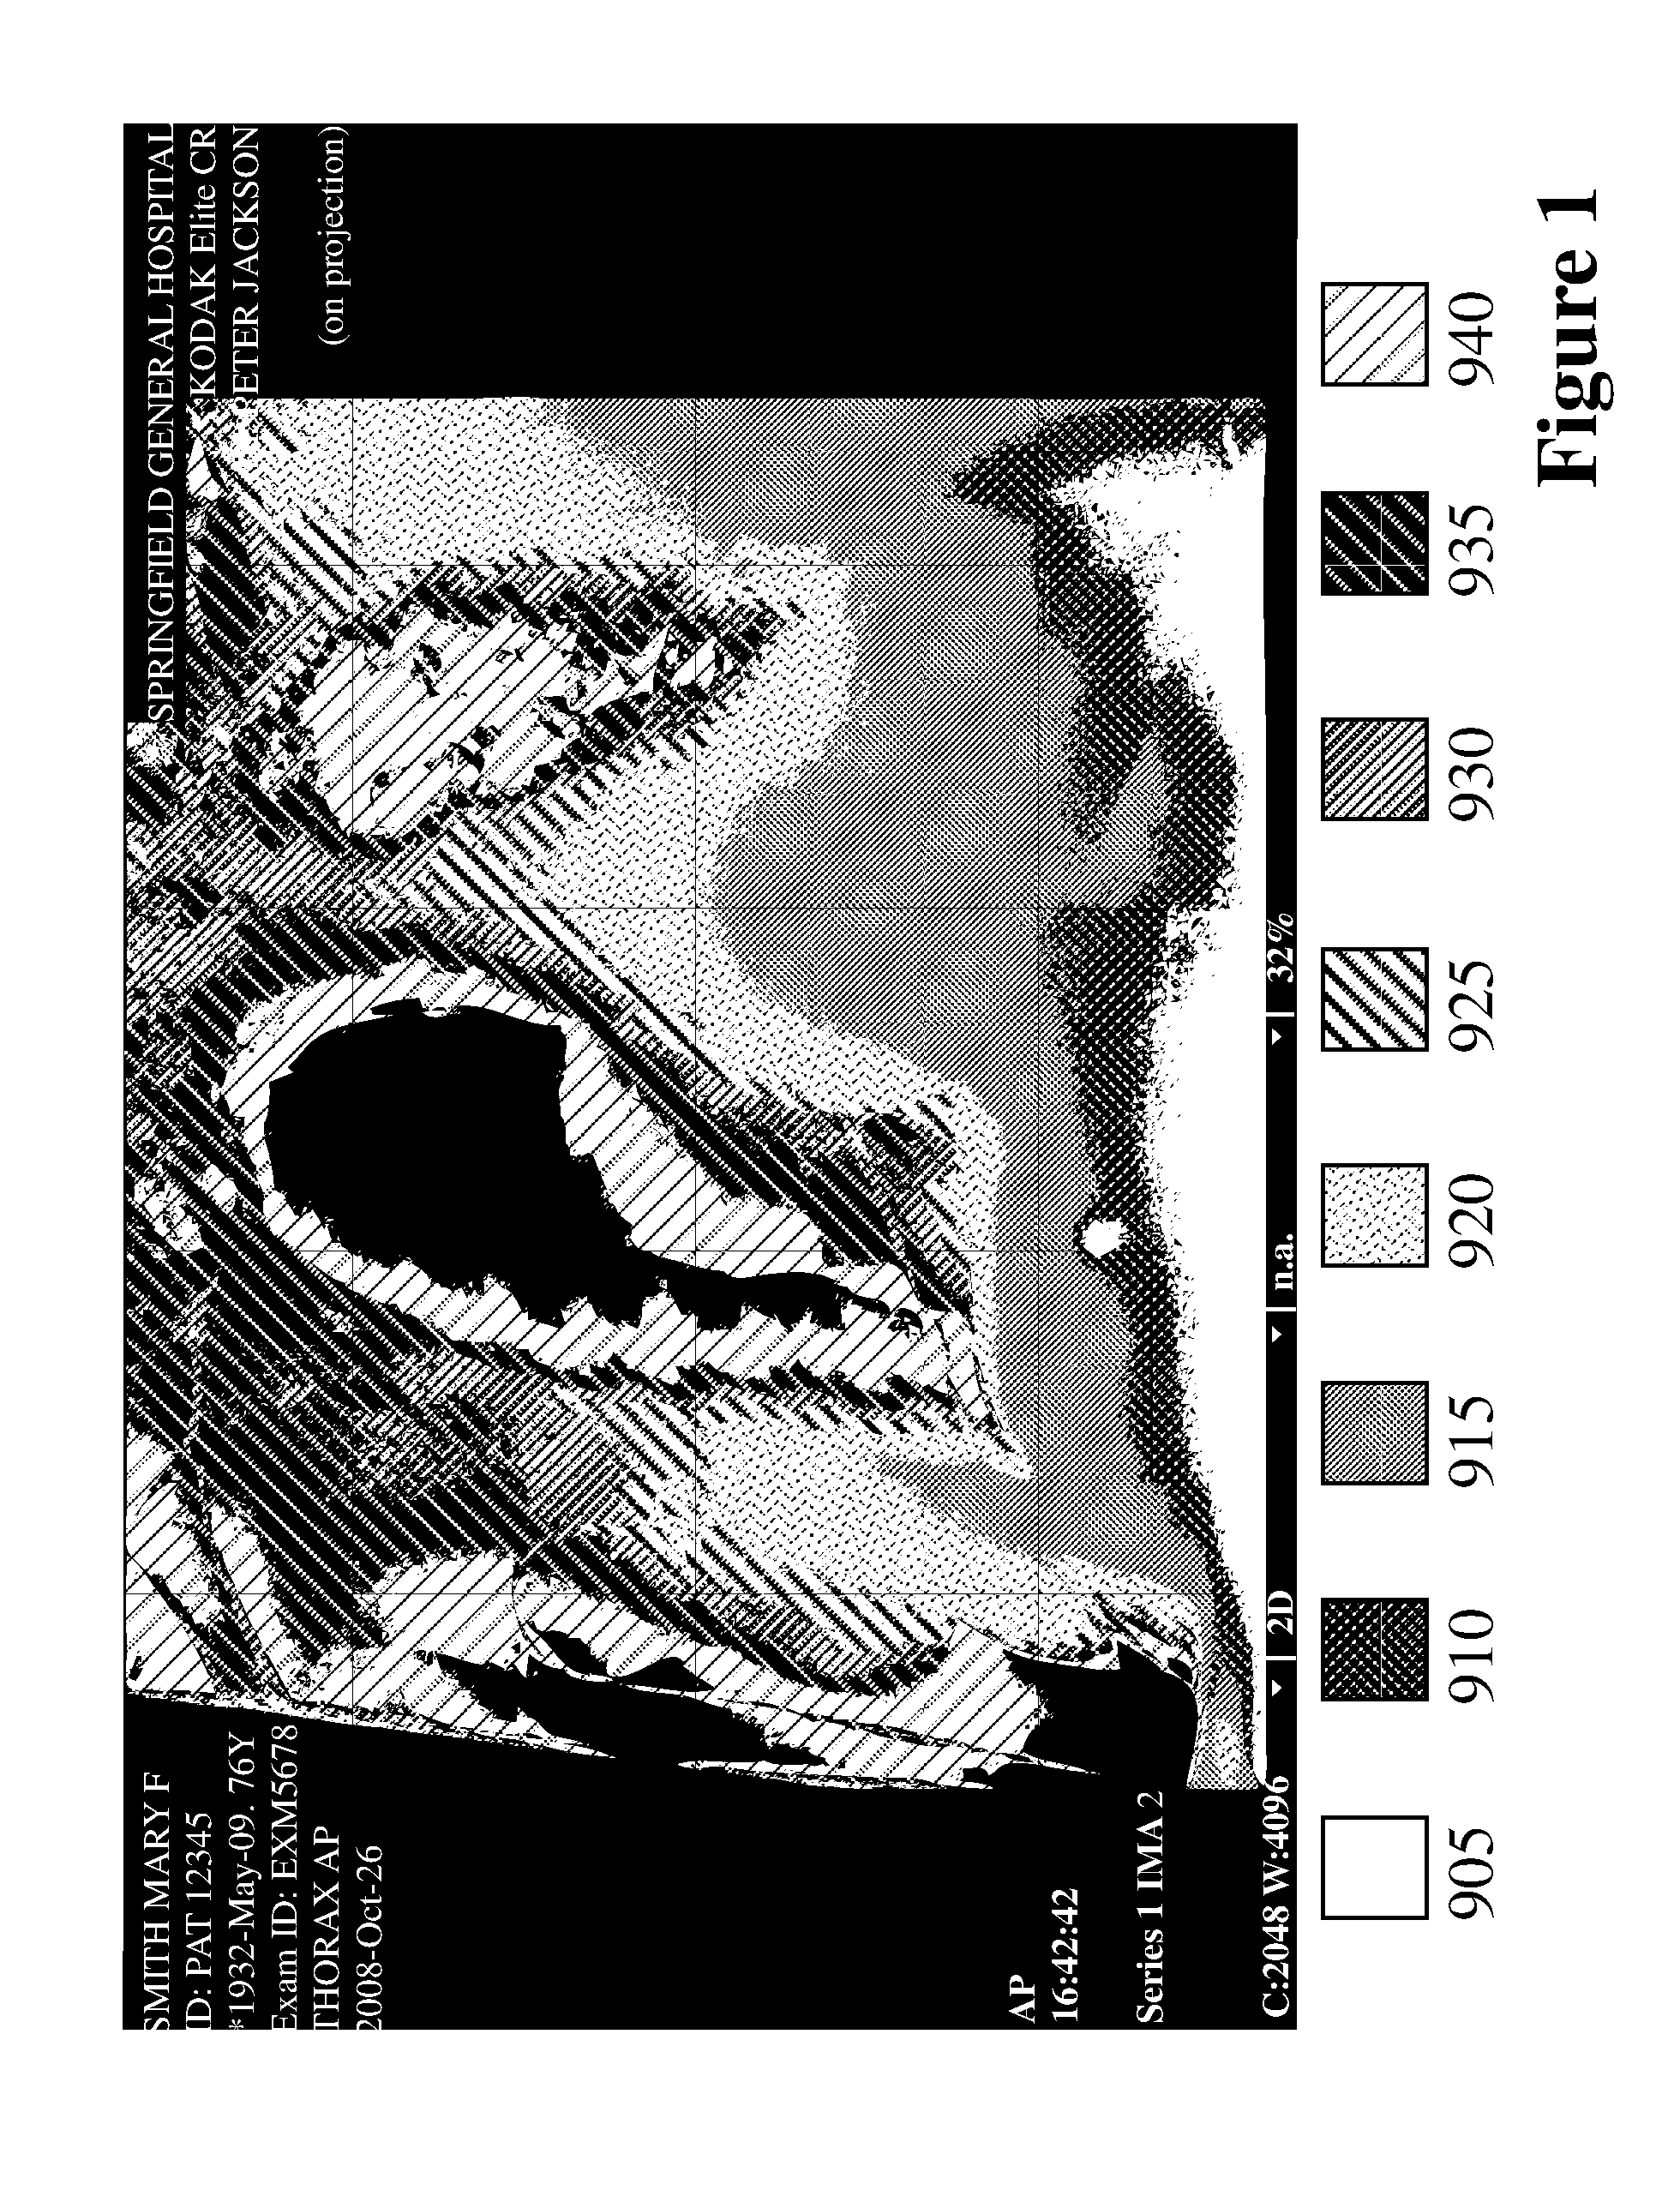 Method and system for rule-based anonymized display and data export